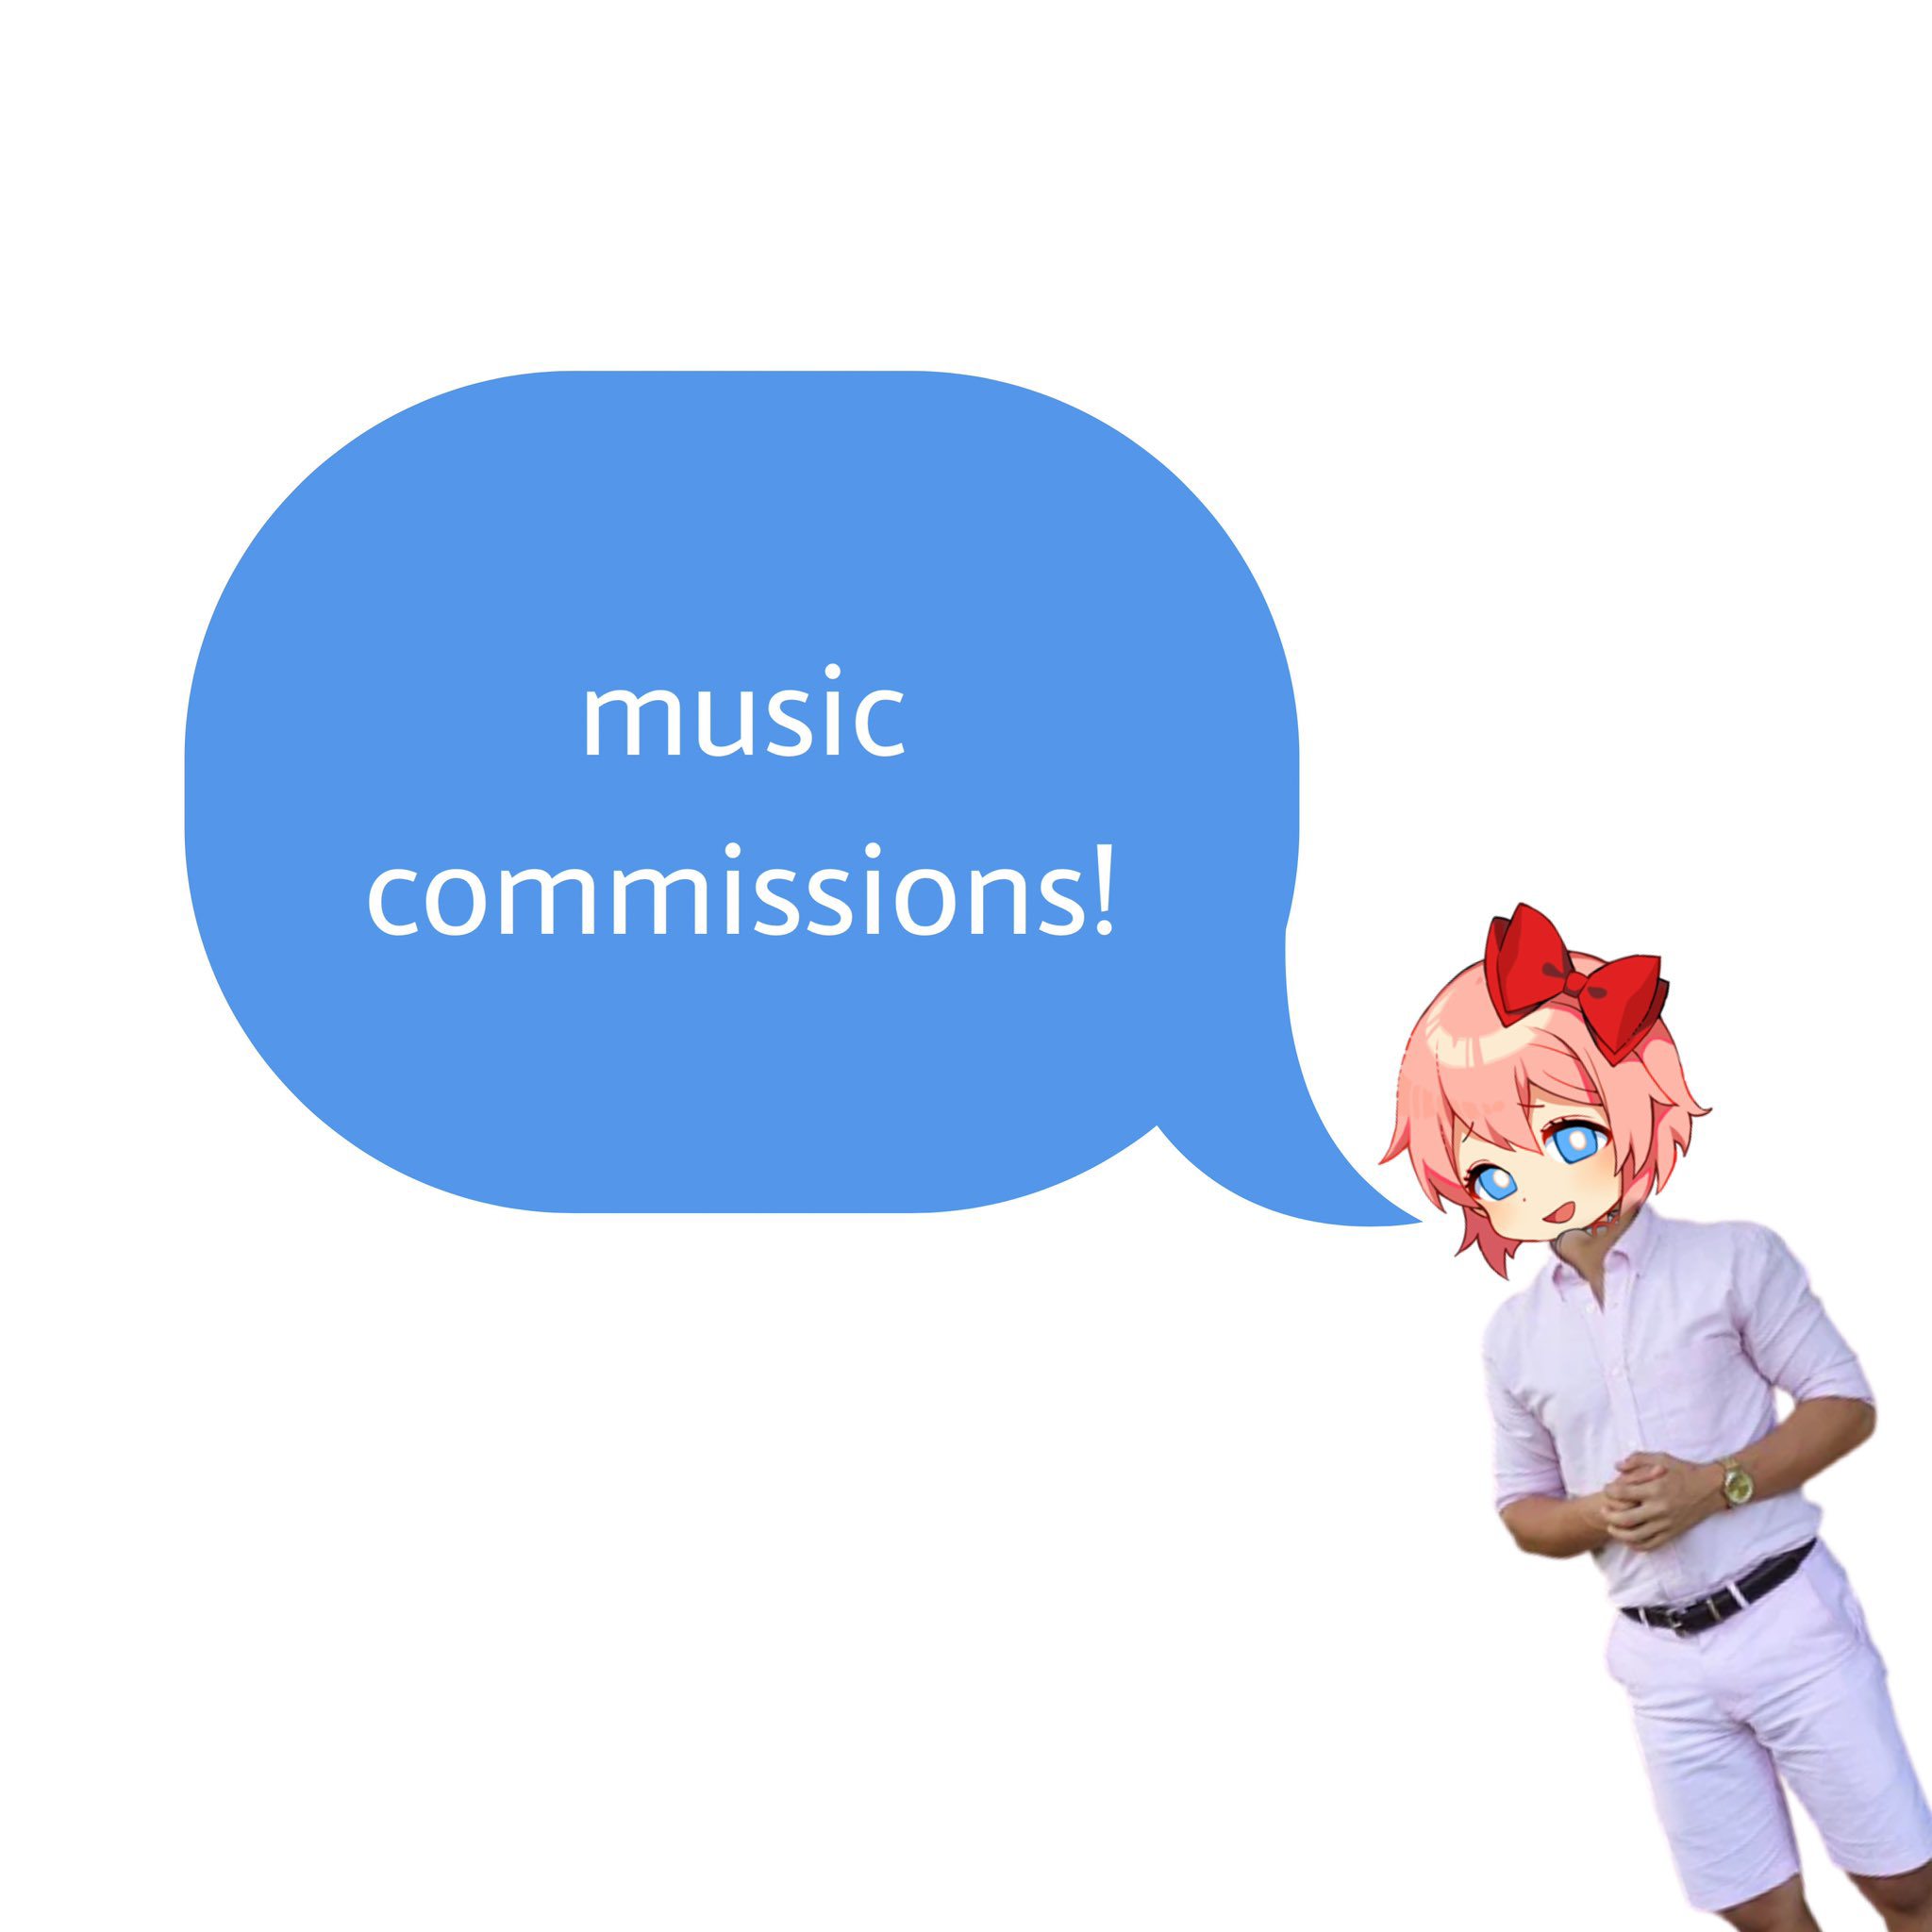 Music commissions are open